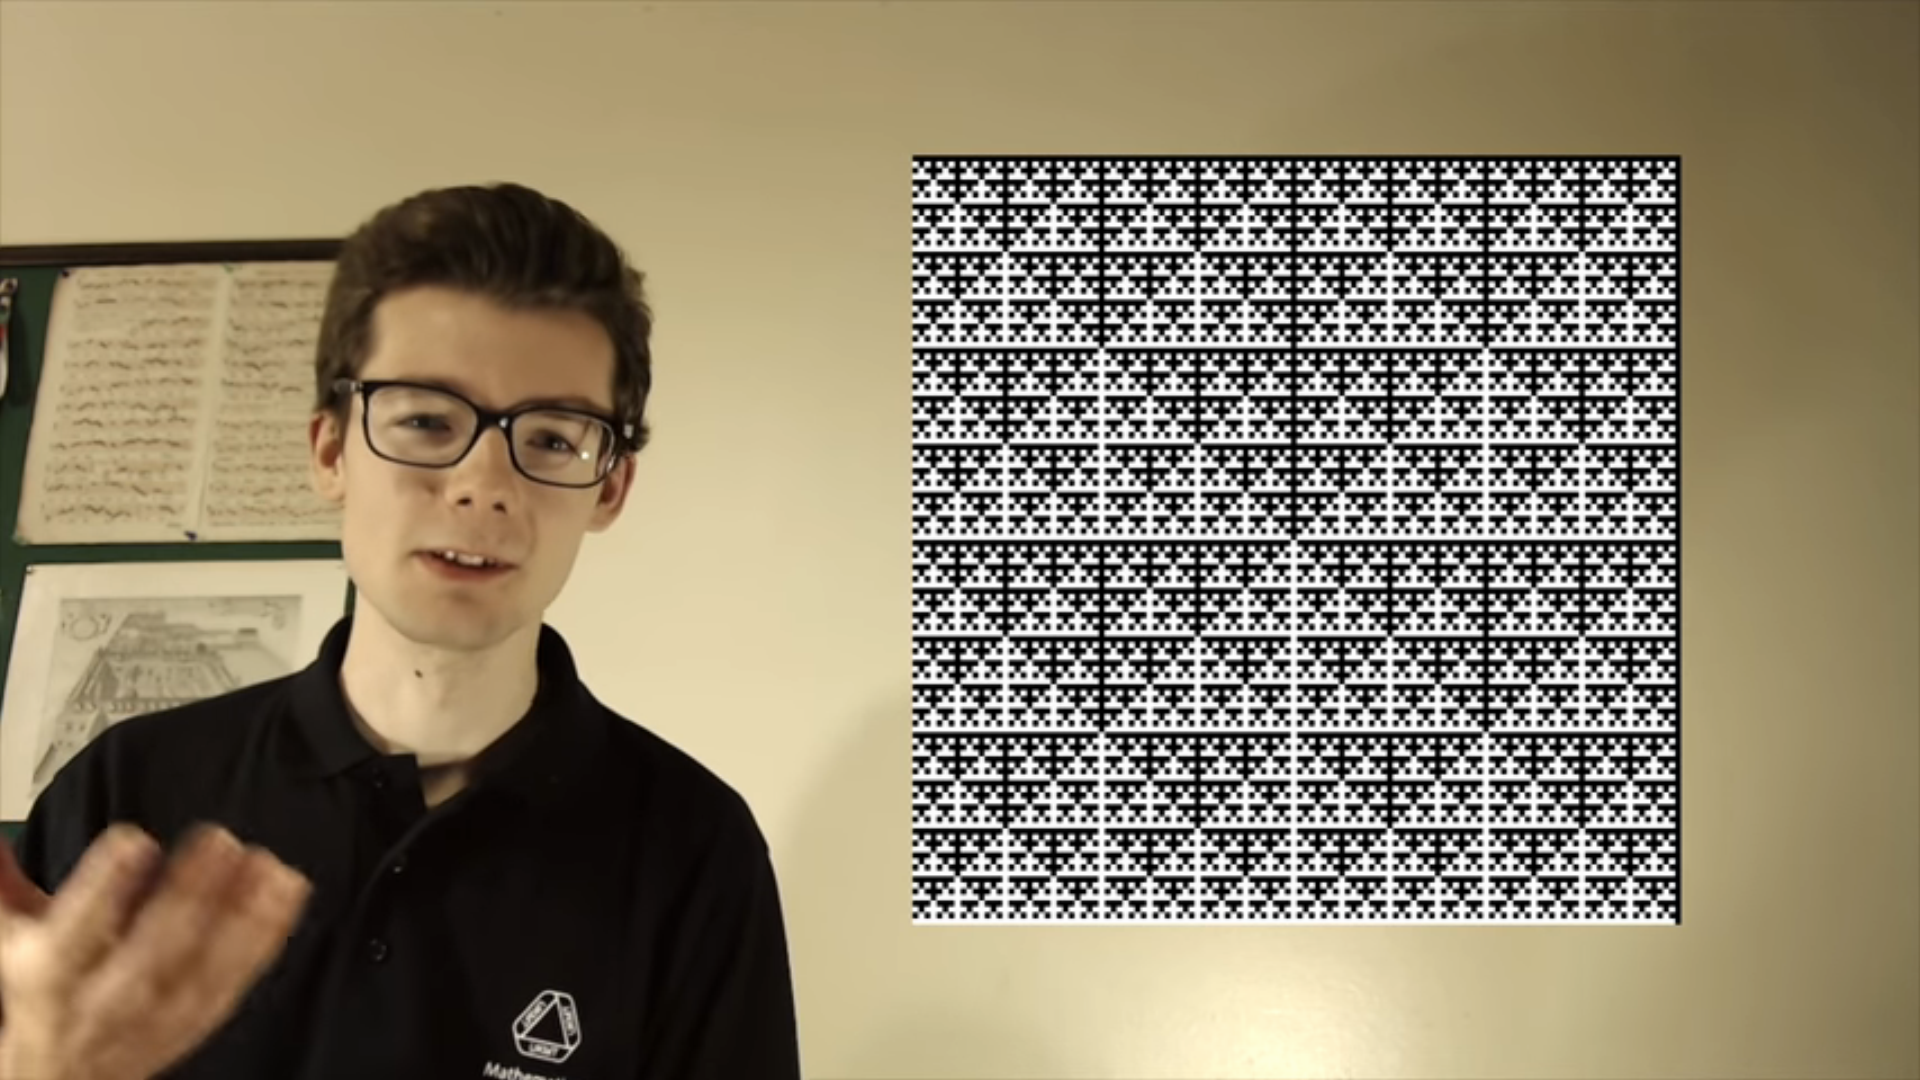 Hodkinson's "Carpets, Genetics, and the Pi Fractal" video